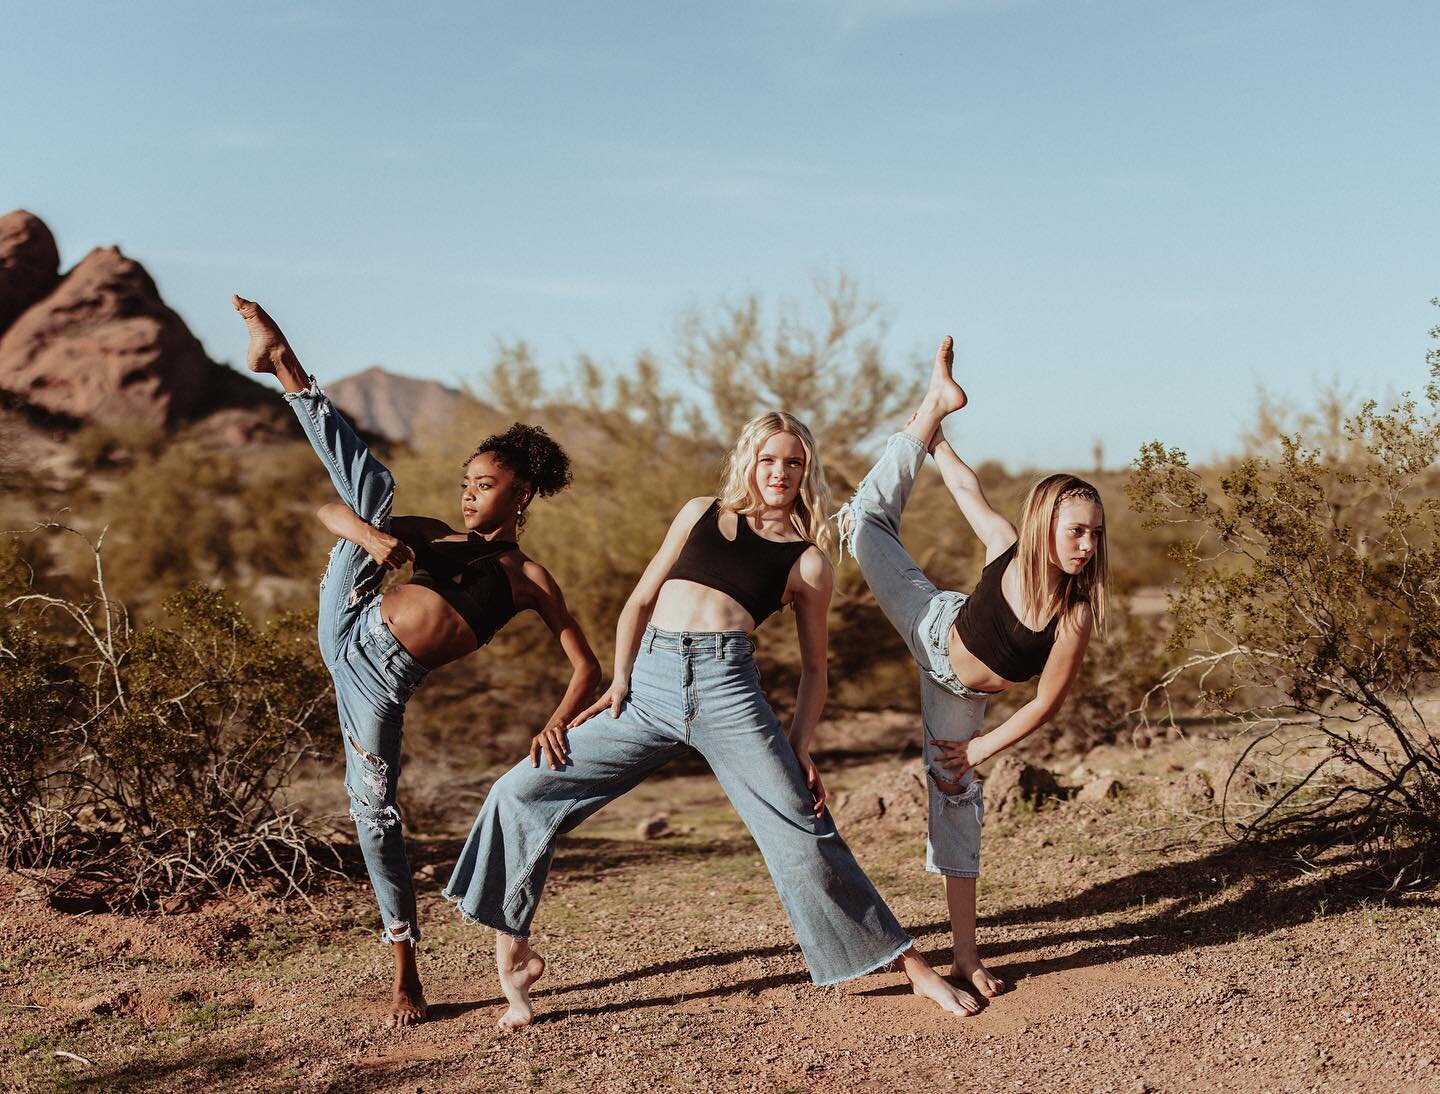 05.01.23✨ CFP Ambassador search for CA &amp; AZ dancers begins tomorrow!! Link to apply will be found in my bio and at www.clairefabrephoto.com 🫶🏼 #clairefabrephotography